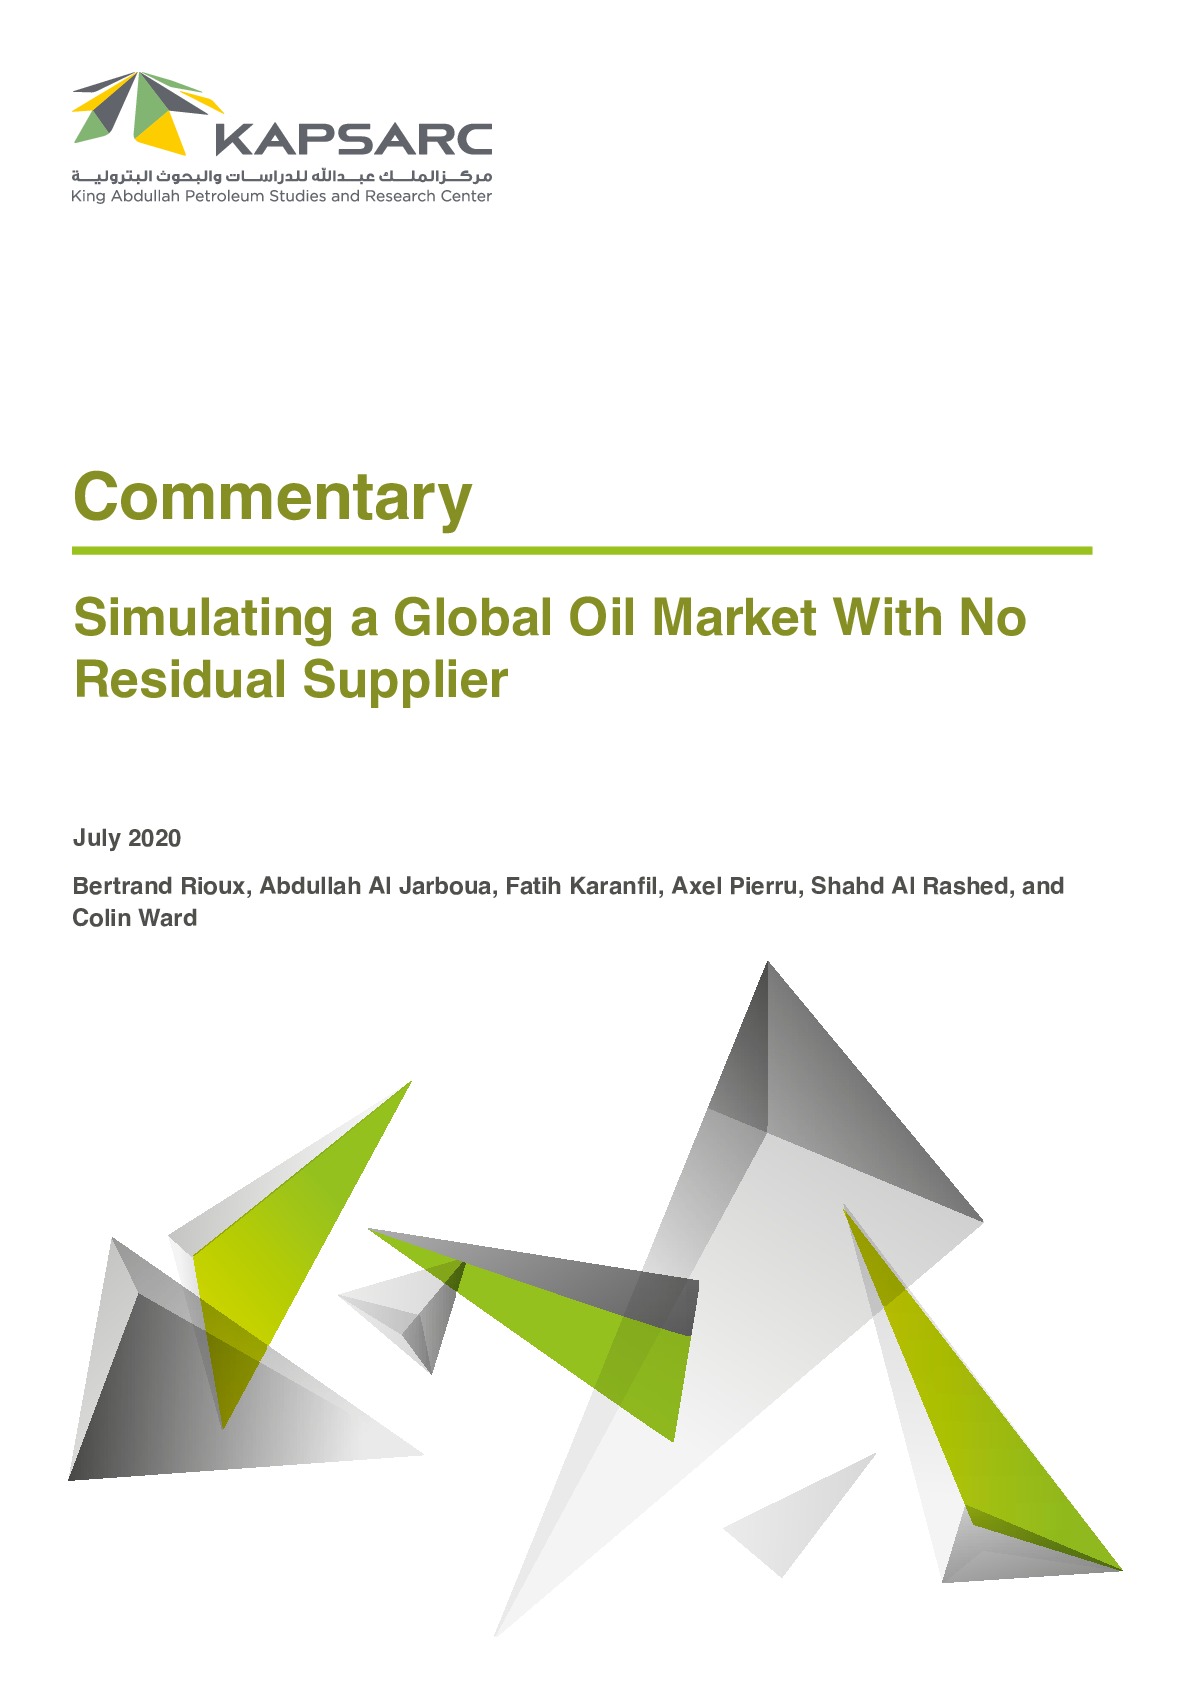 Simulating a Global Oil Market With No Residual Supplier